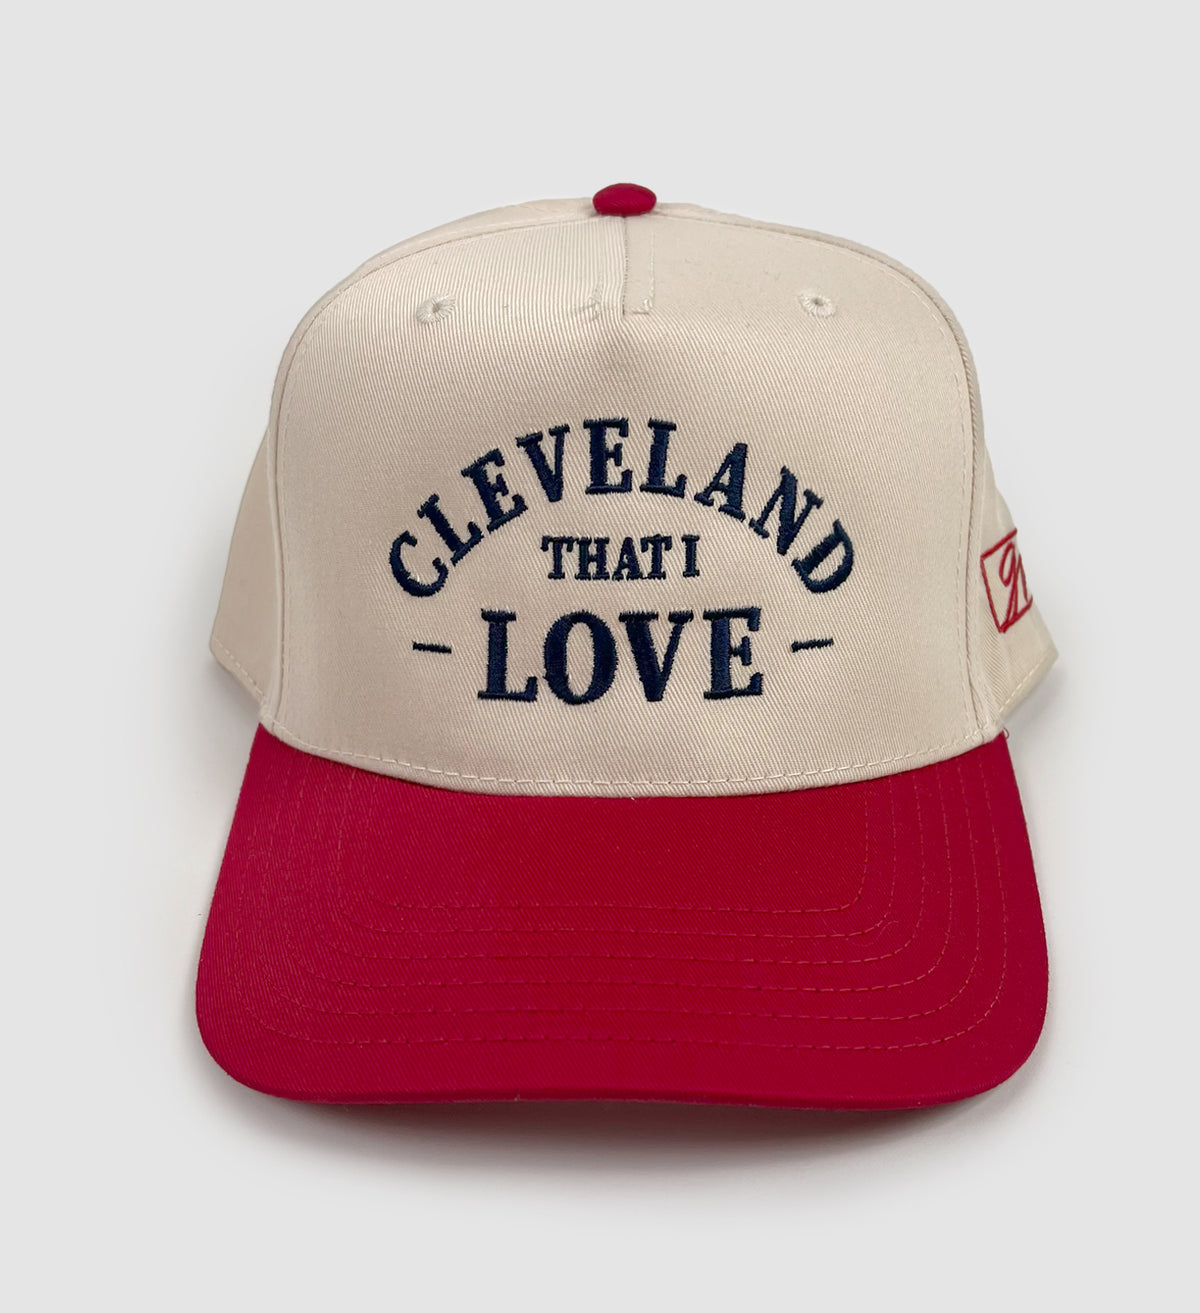 Cleveland That I Love Two Tone Snap Back